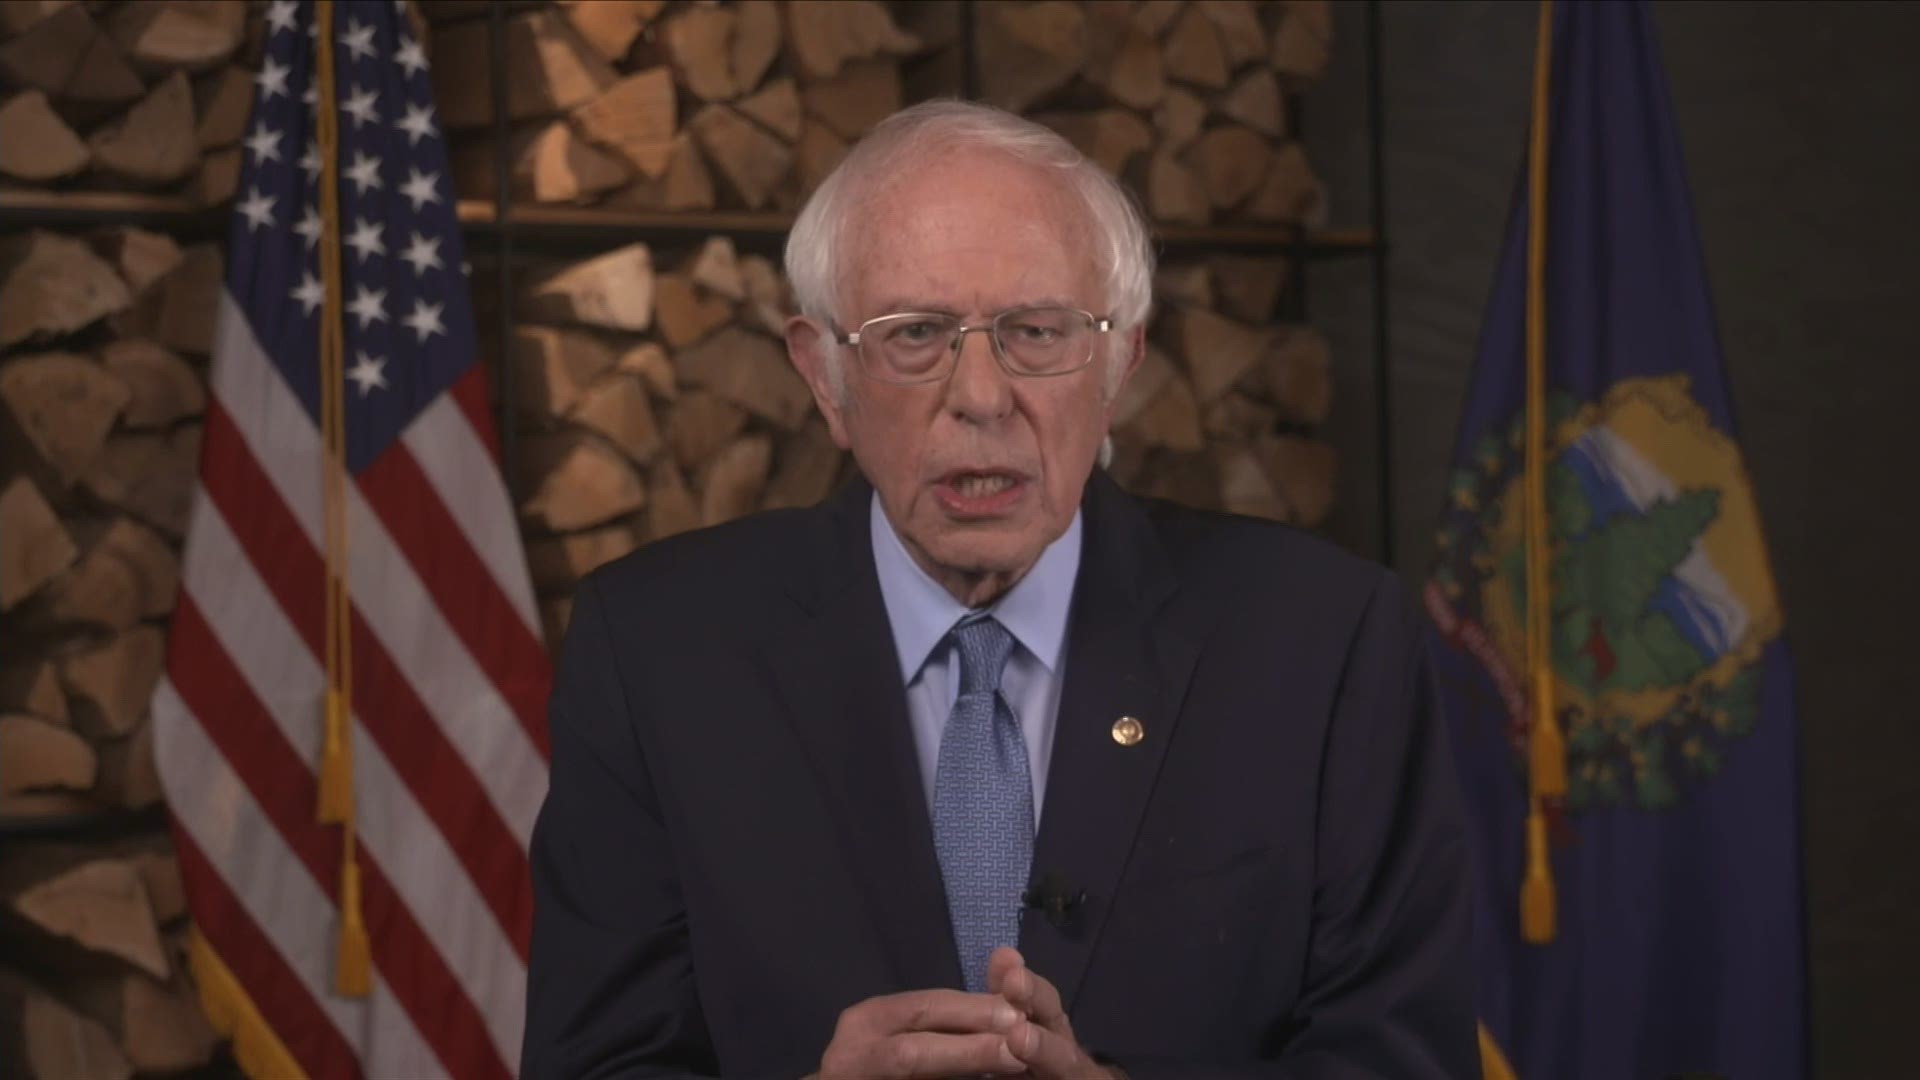 Senator Bernie Sanders said the upcoming presidential election is about 'preserving our democracy' and urged his supporters and everyone else to vote for Joe Biden.